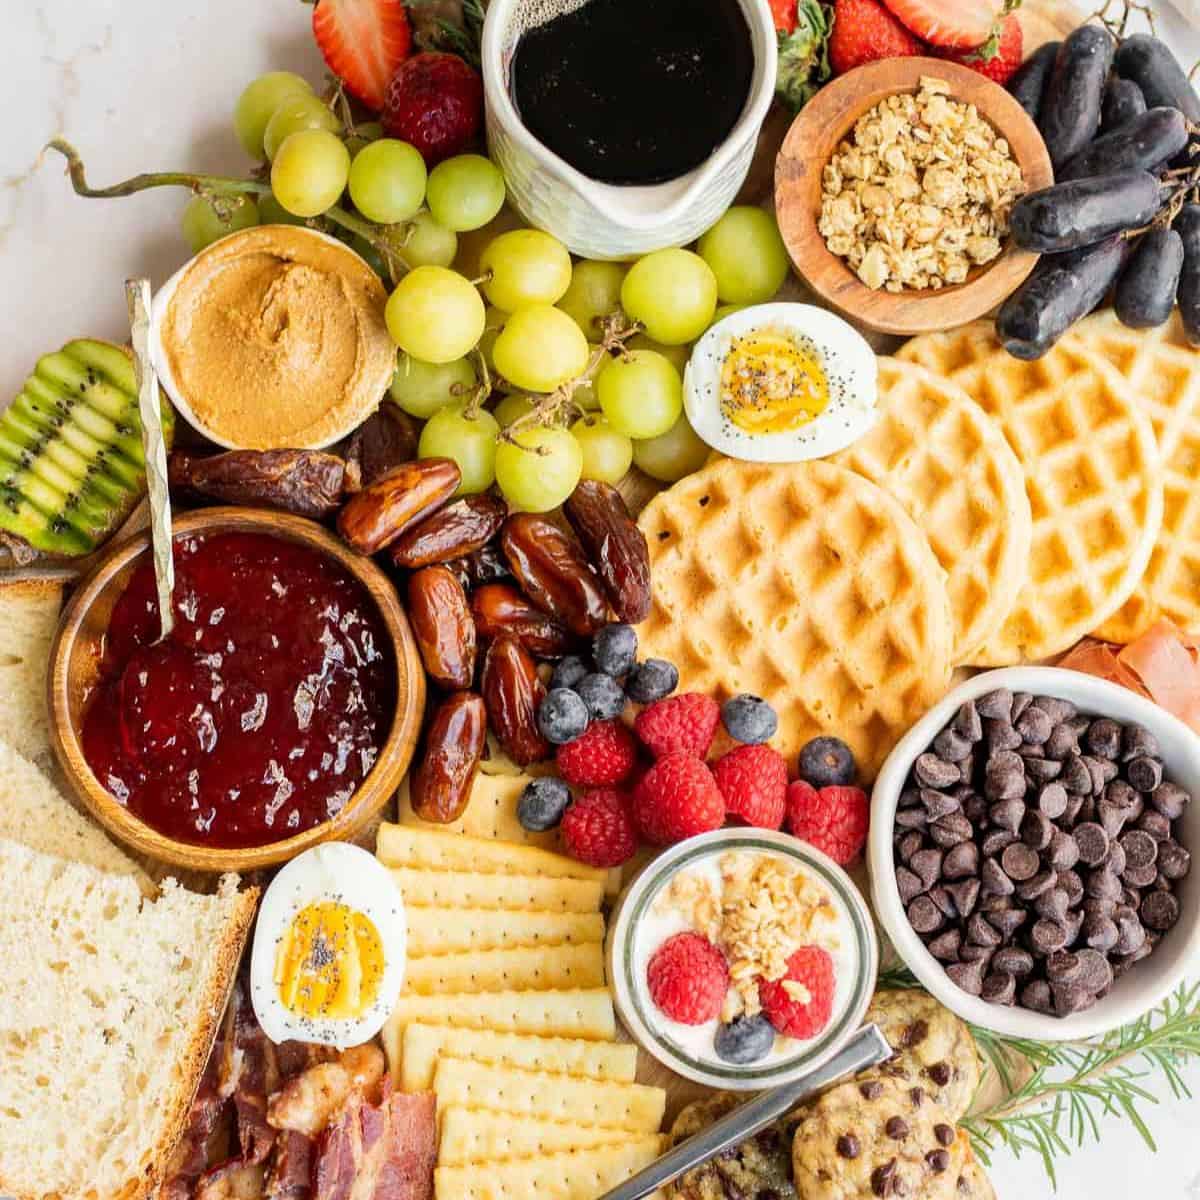 breakfast charcuterie board with waffles, fruit, meats, and spreads on a wooden board.